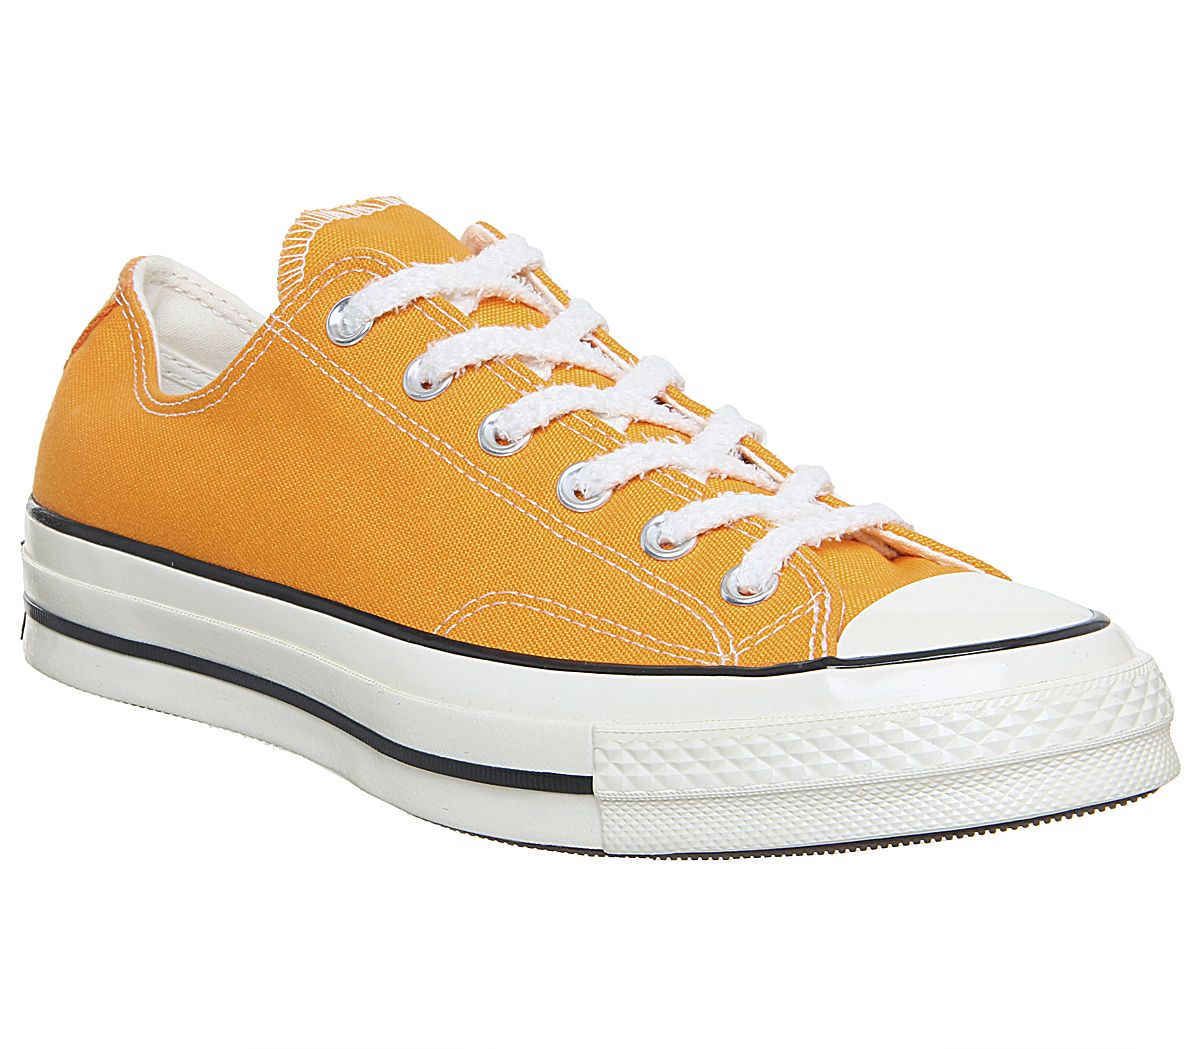 Converse Chuck Taylor All Star Ox Trainers, Orange at John 